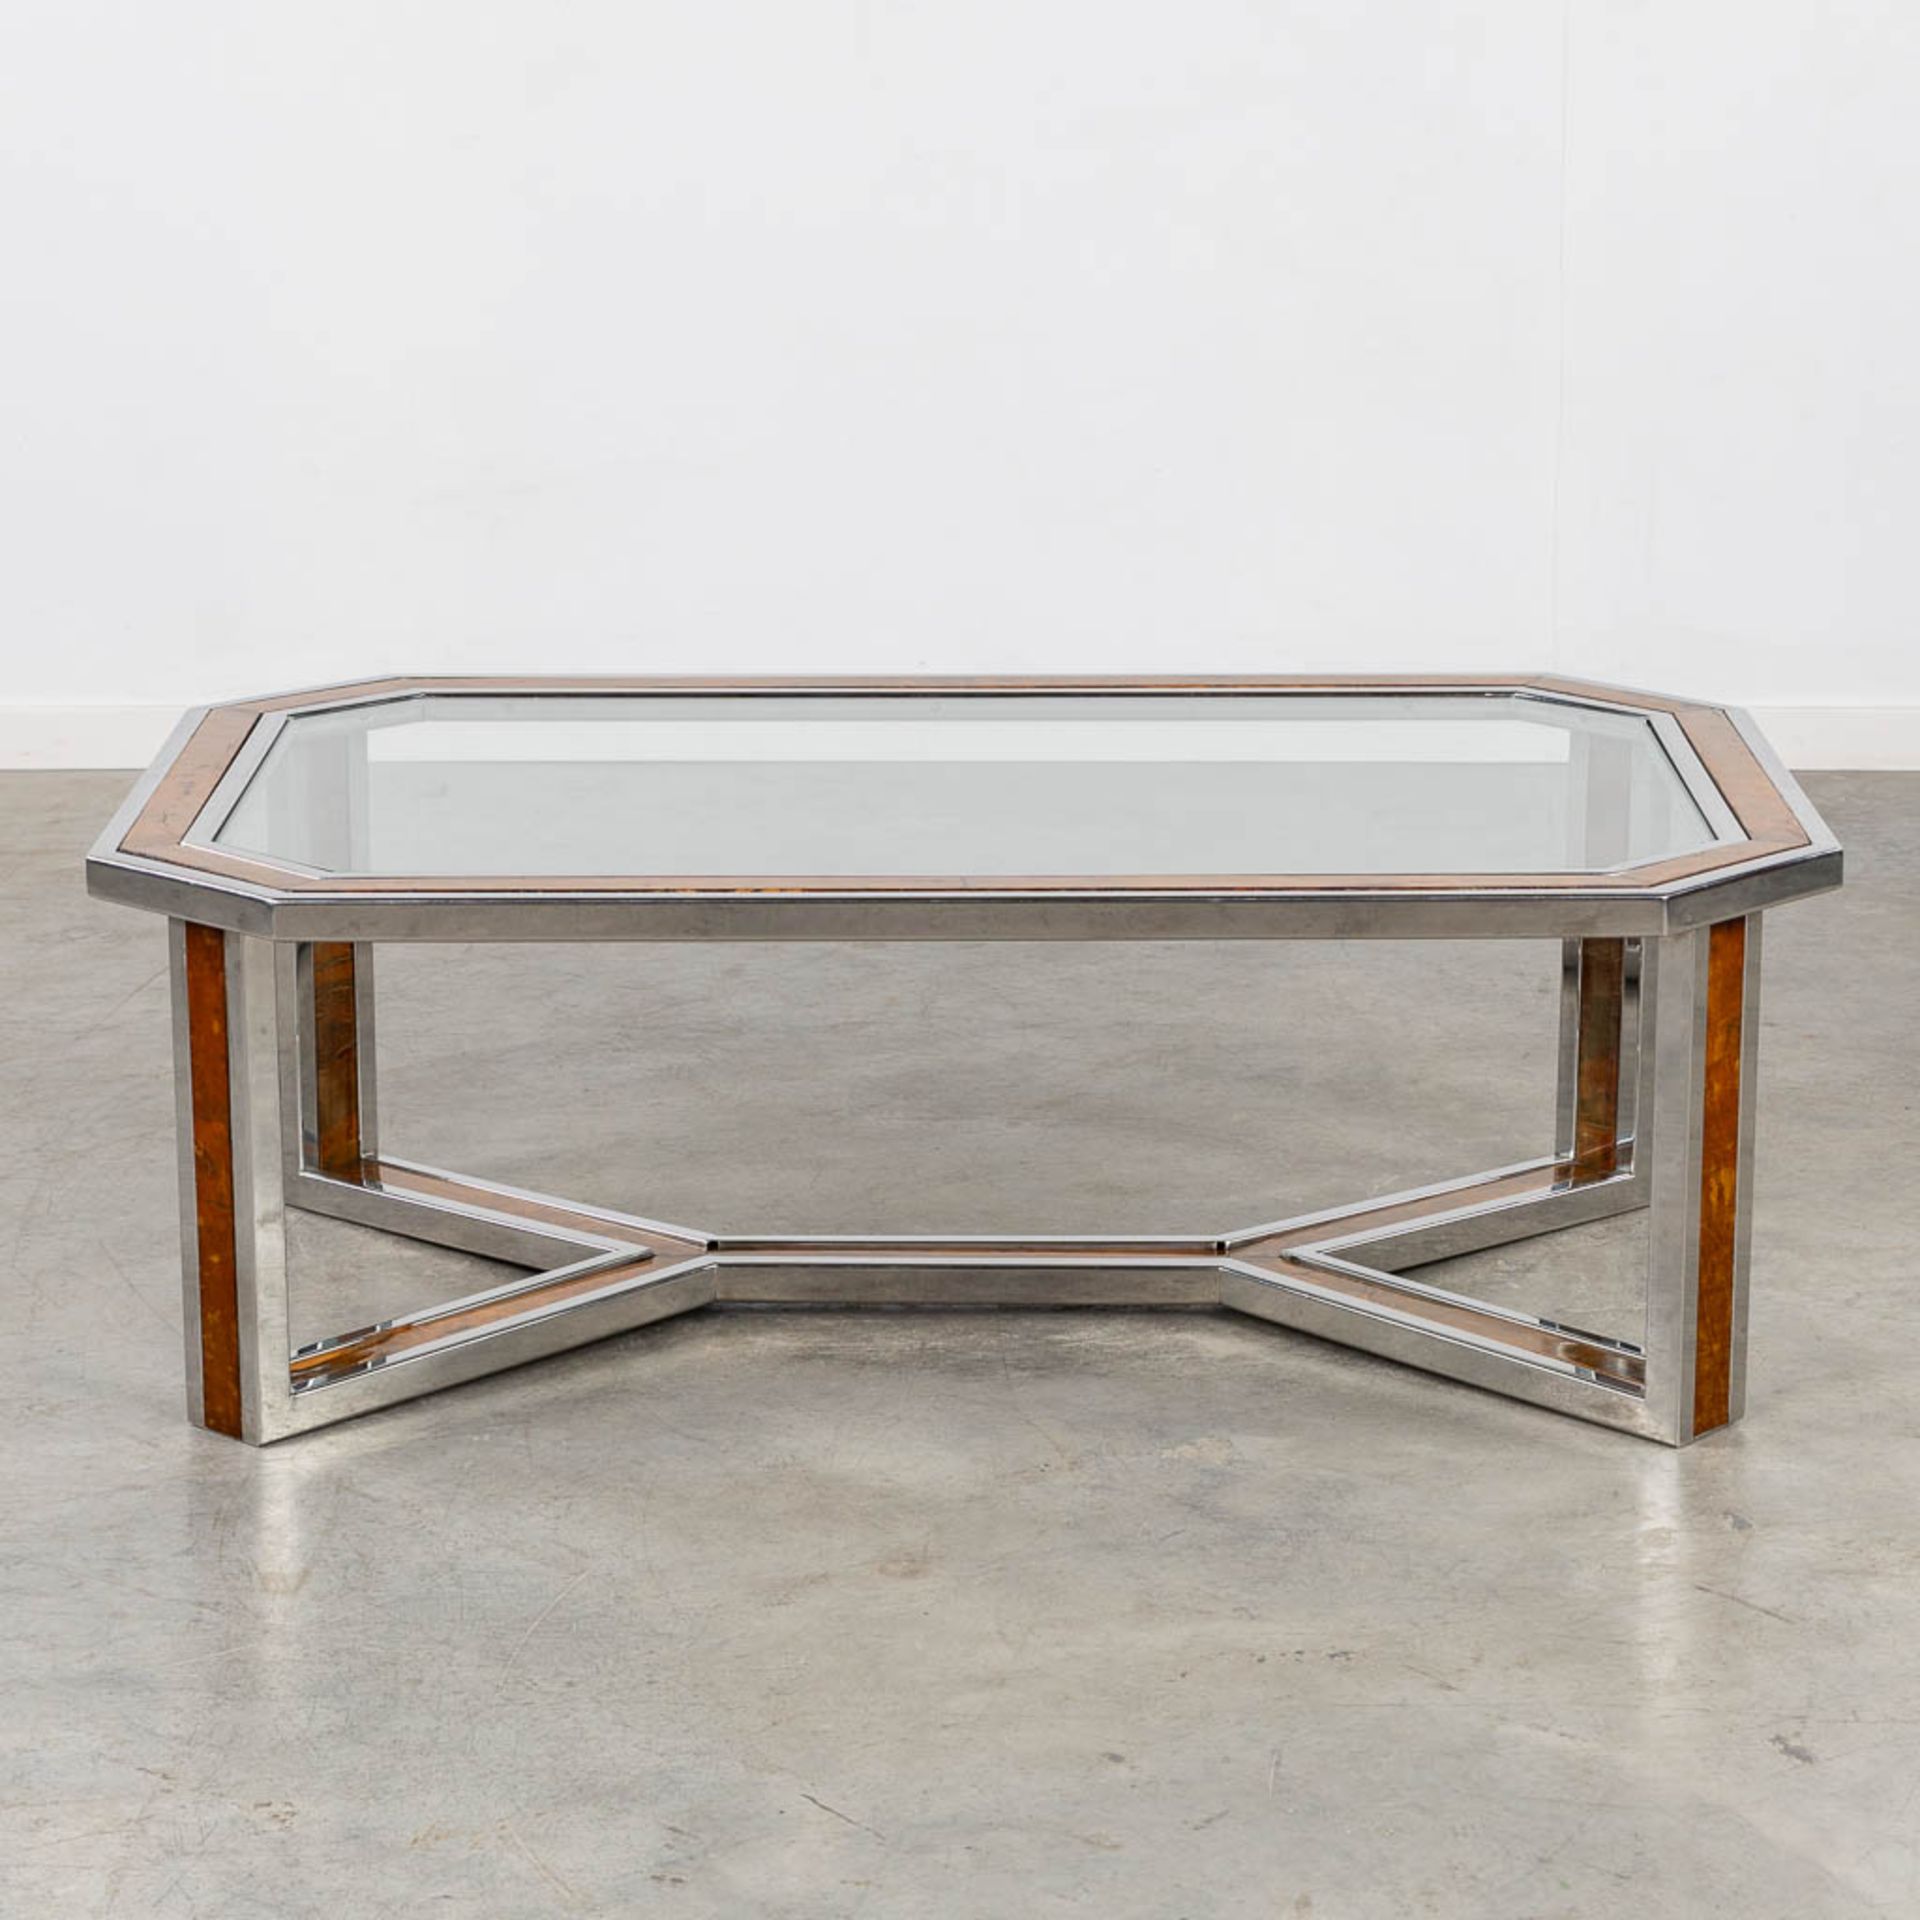 A coffee table, chrome with a faux wood inlay and a glass top. (L:80 x W:120 x H:40 cm) - Bild 3 aus 10